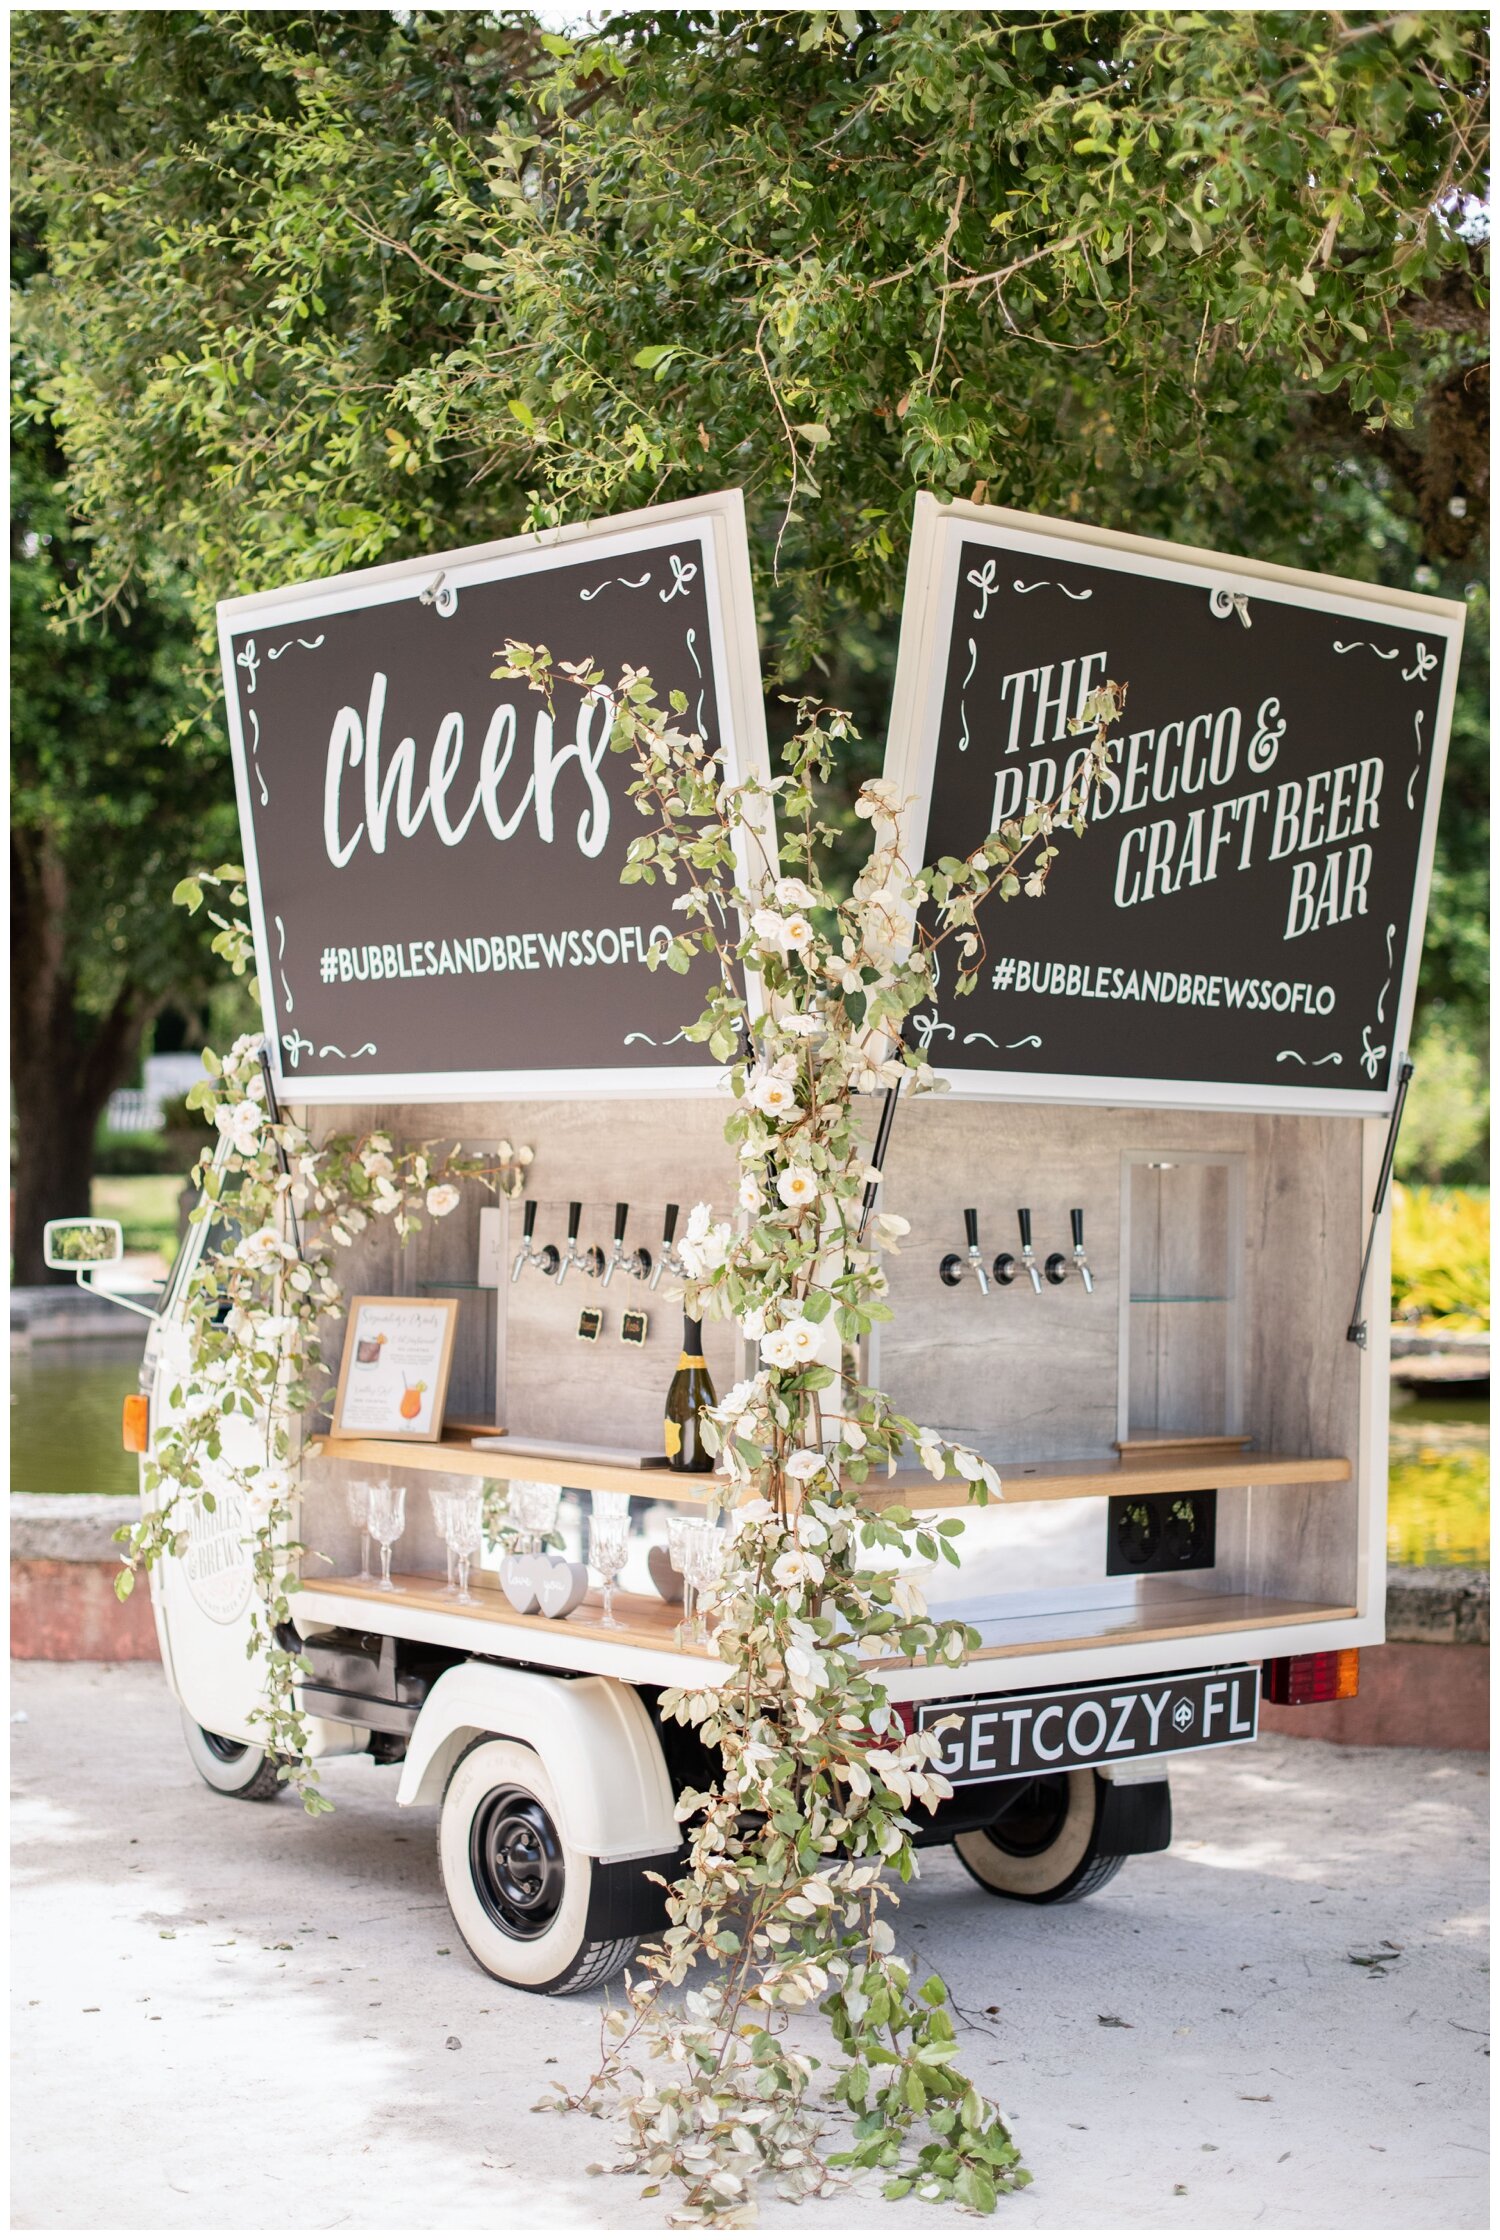 bar cart with cheers signage